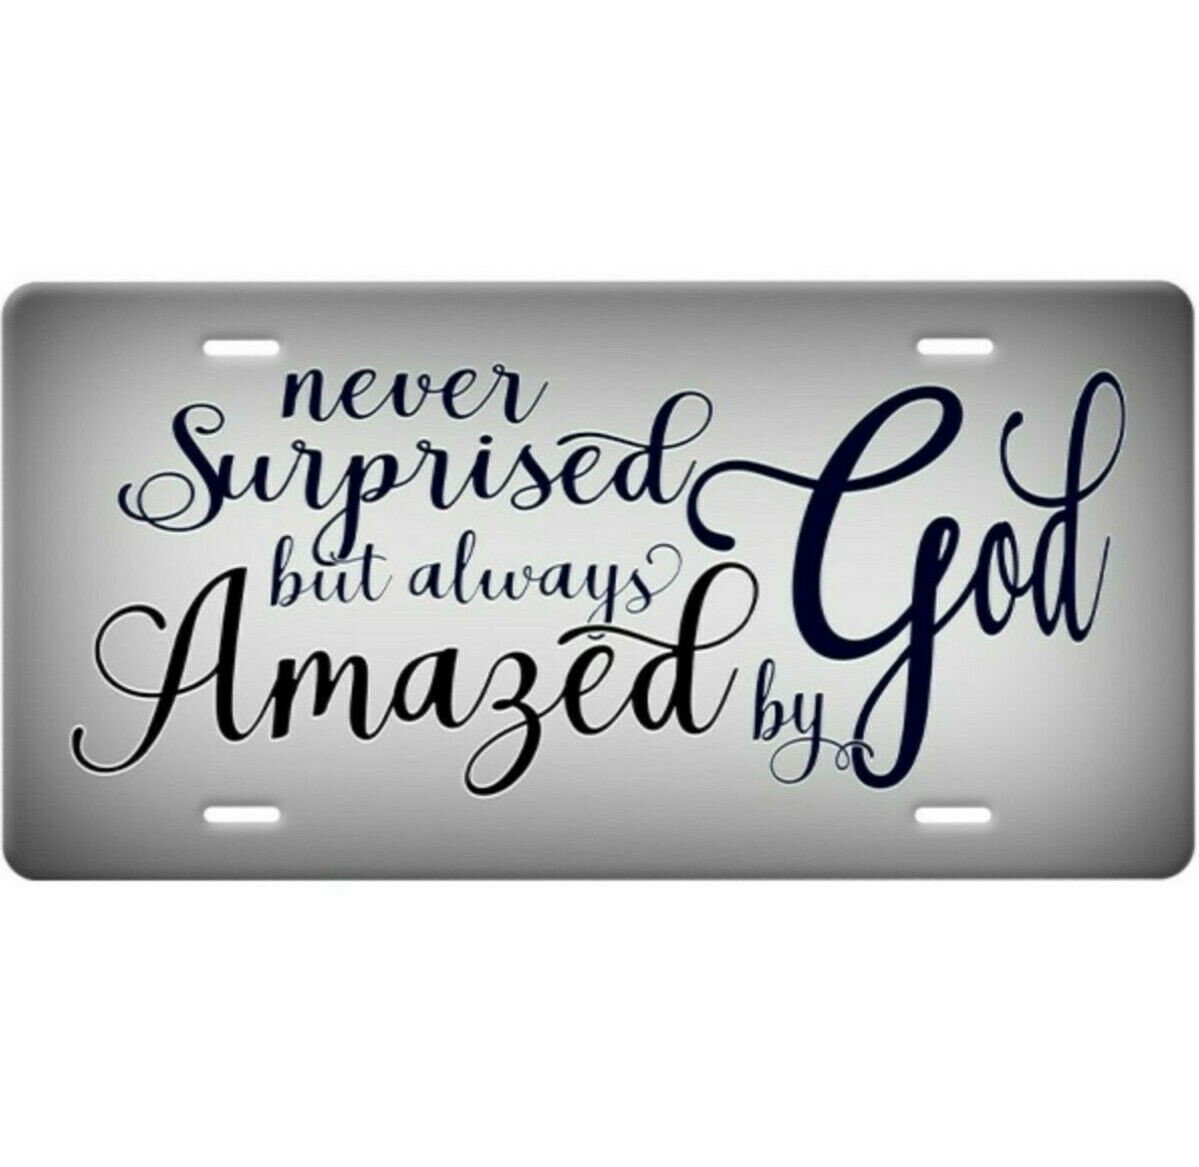 Always Amazed By God Christian License Plate-Black Quote On Blended Grey Car Tag